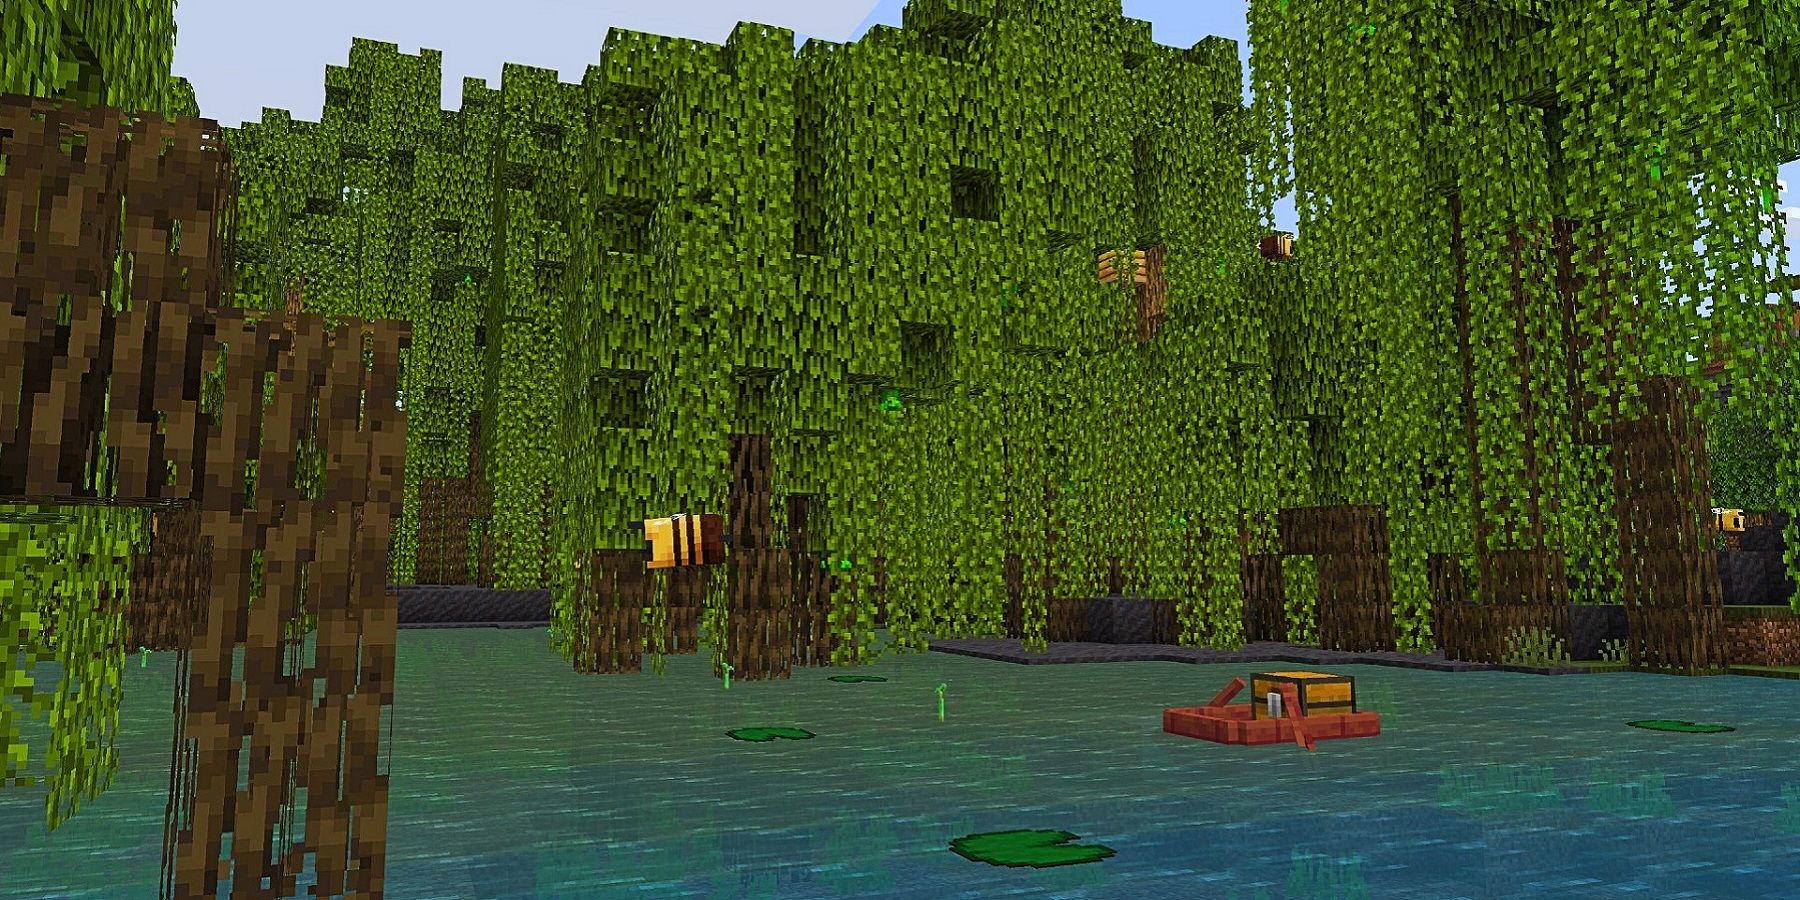 Image from Minecraft showing a swap with Mangrove trees.